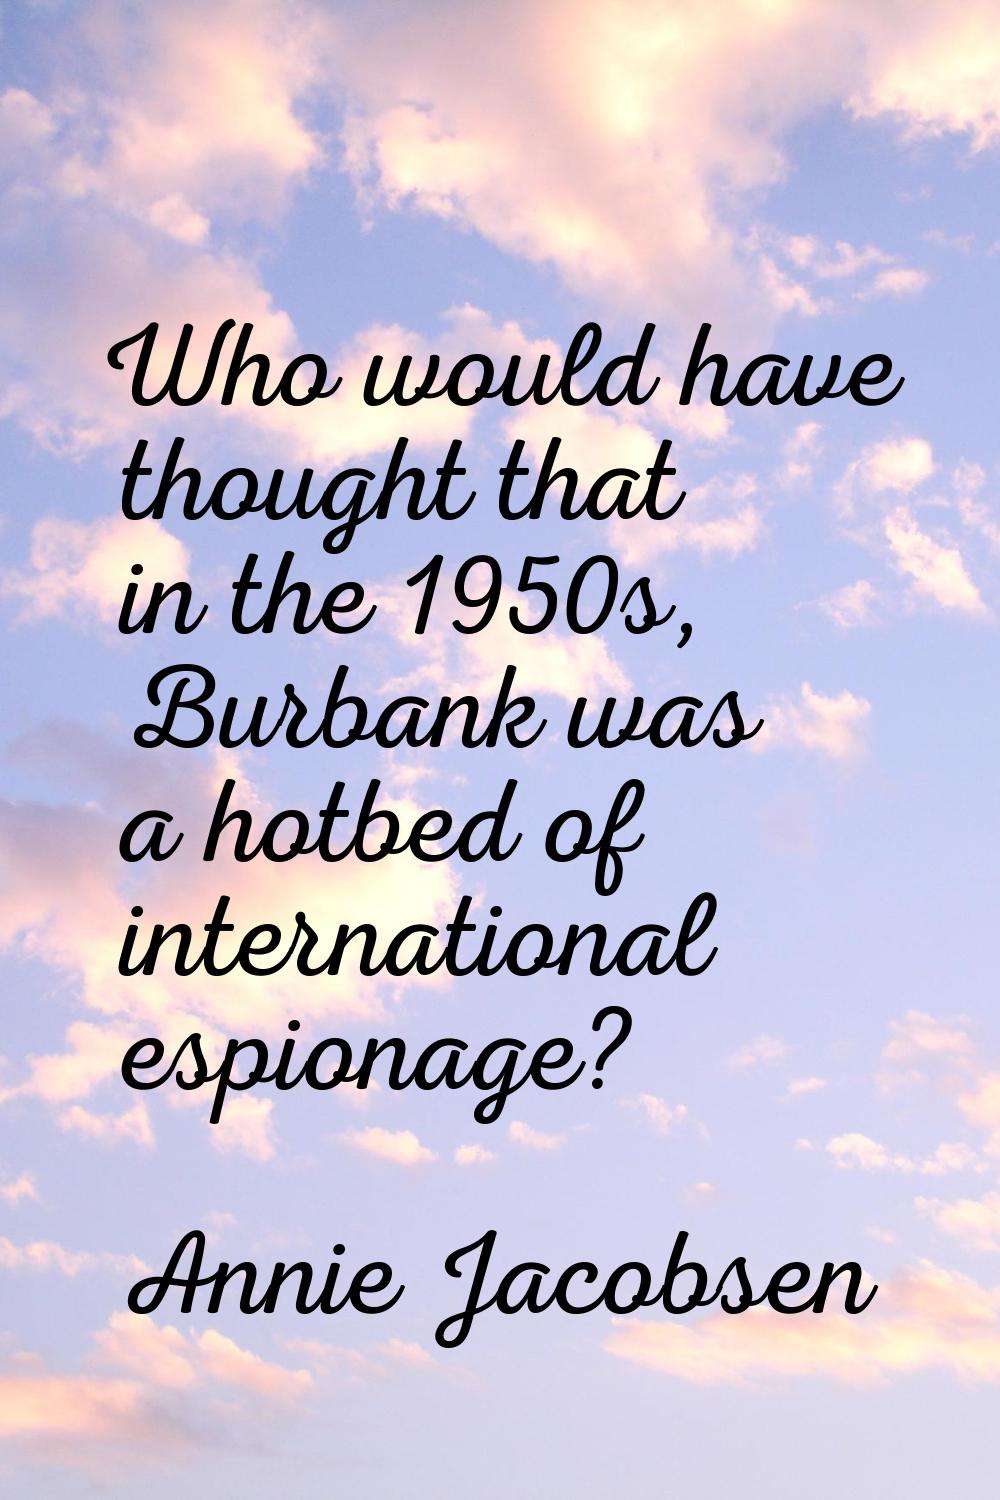 Who would have thought that in the 1950s, Burbank was a hotbed of international espionage?